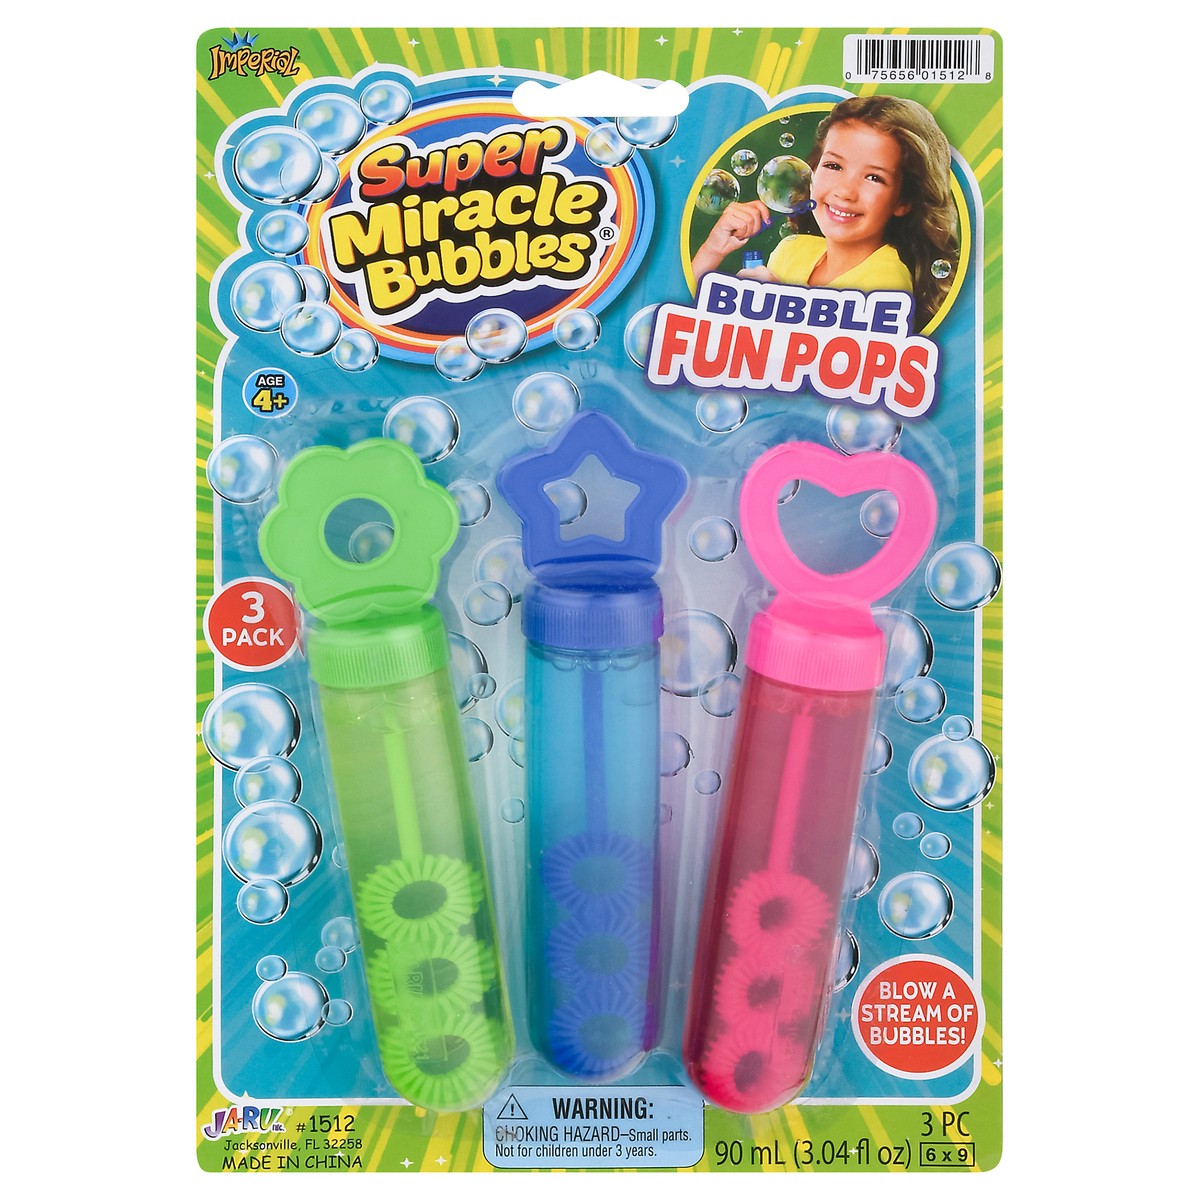 slide 1 of 8, Imperial Super Miracle Bubbles 3 Pack Bubble Fun Pops Age 4+ 3 Toys, 3 ct